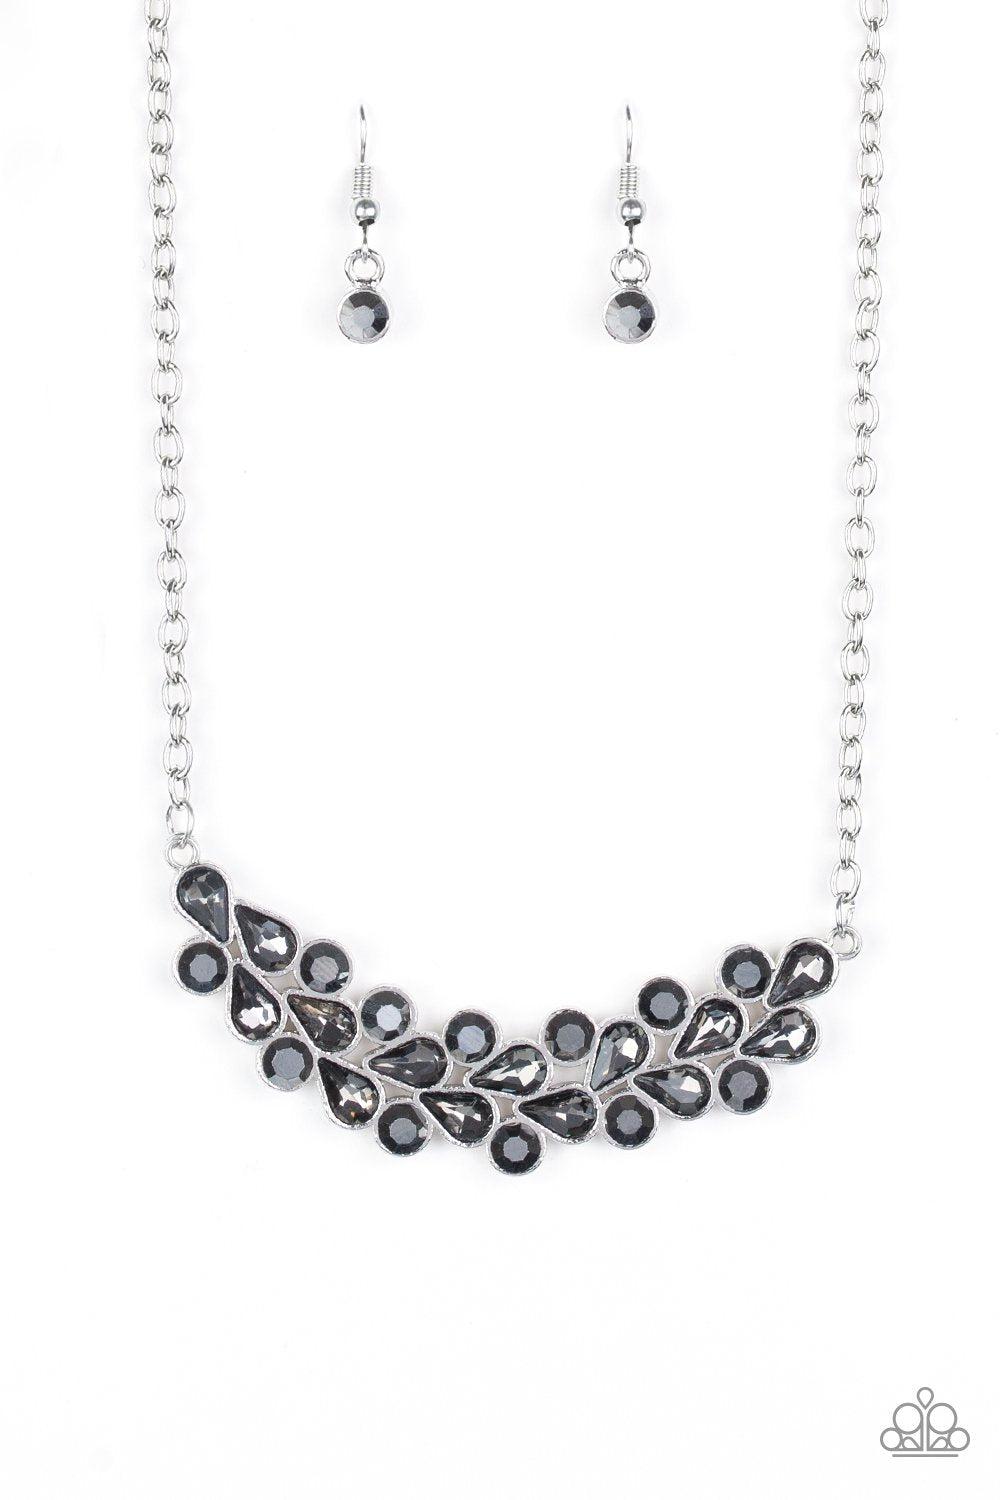 Special Treatment Silver, Hematite and Smoky Rhinestone Necklace - Paparazzi Accessories - Gtdazzlequeen